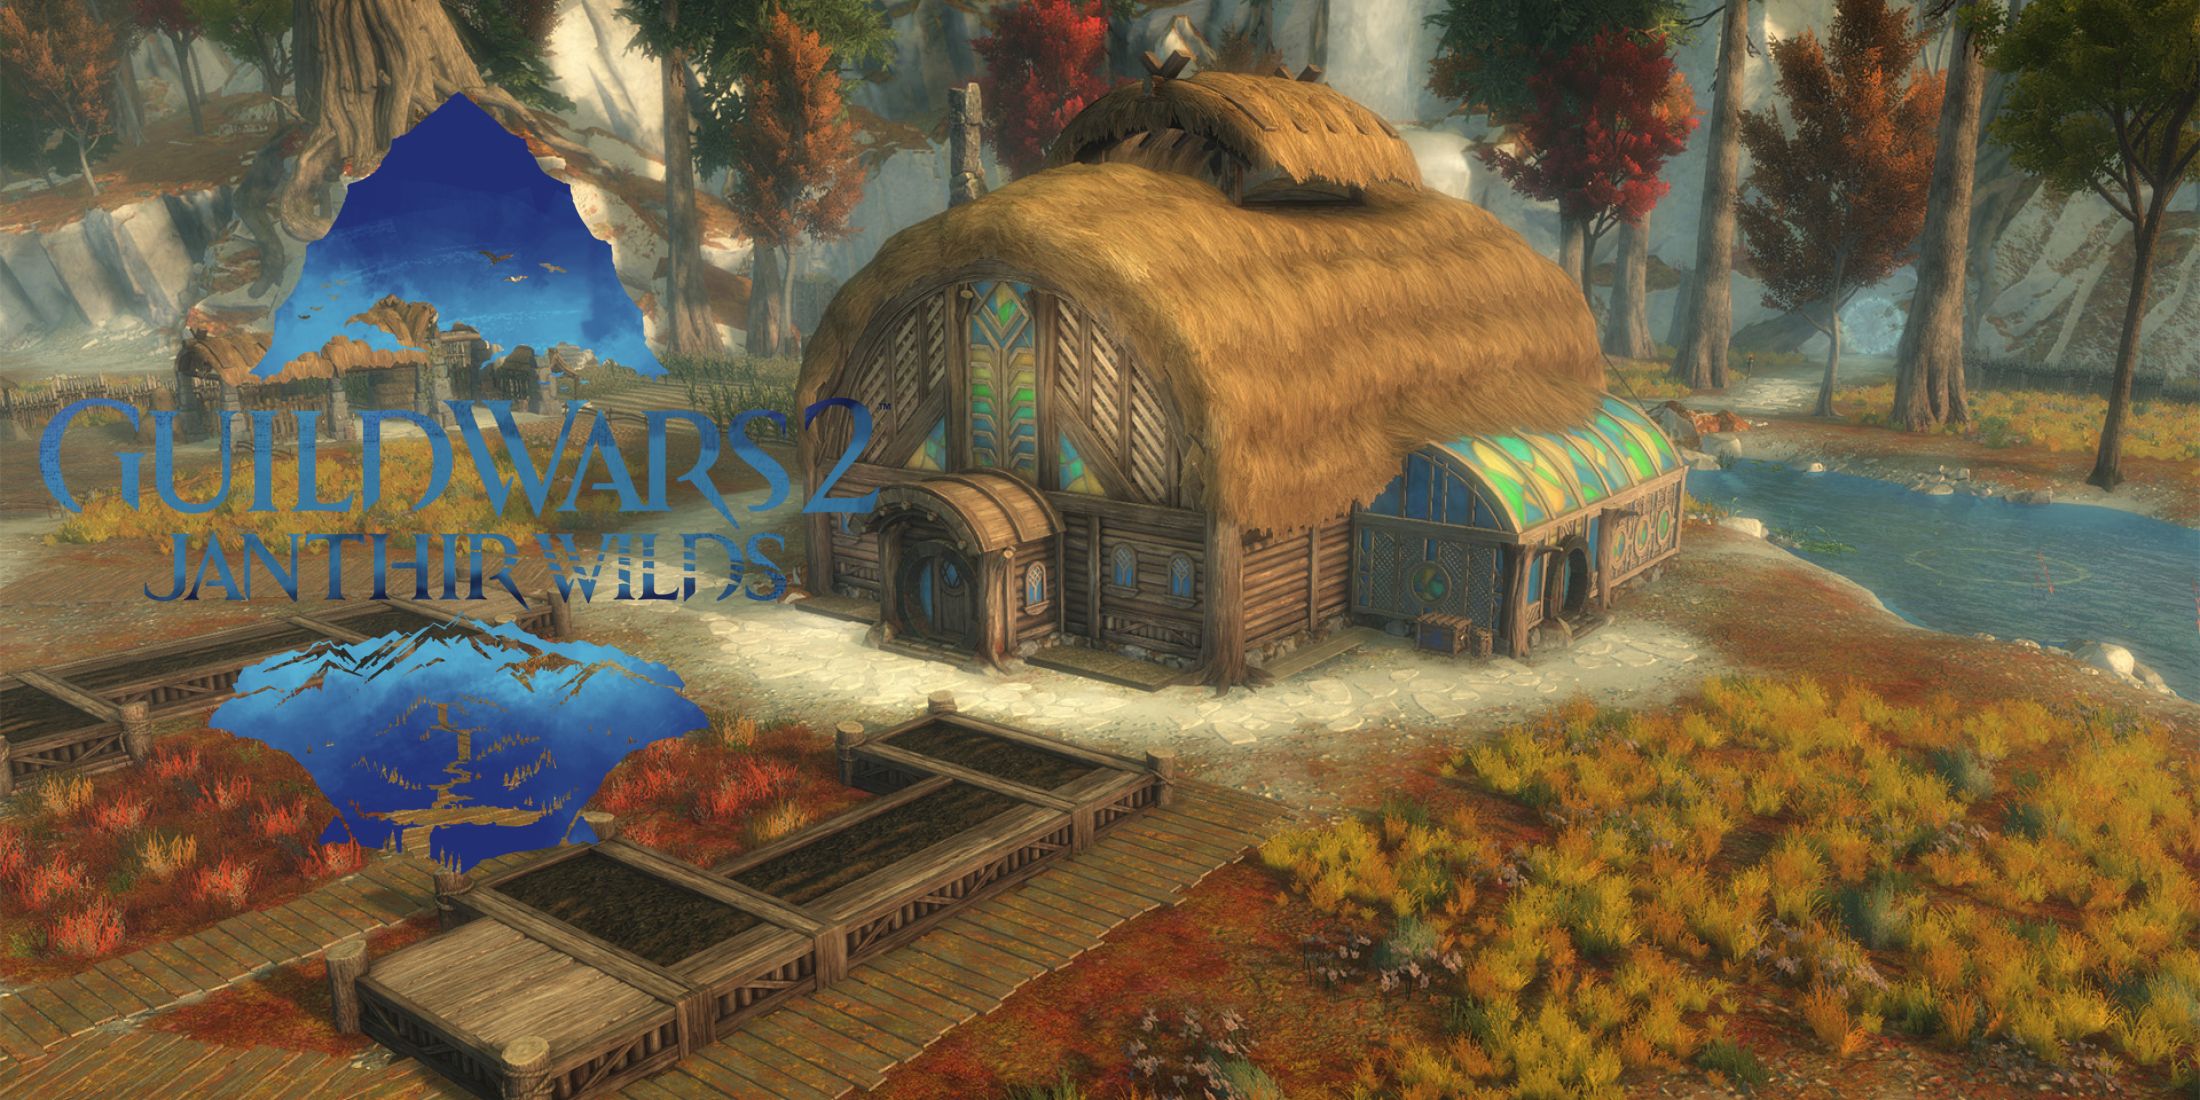 guild wars 2 homesteads with the janthir wilds logo on it